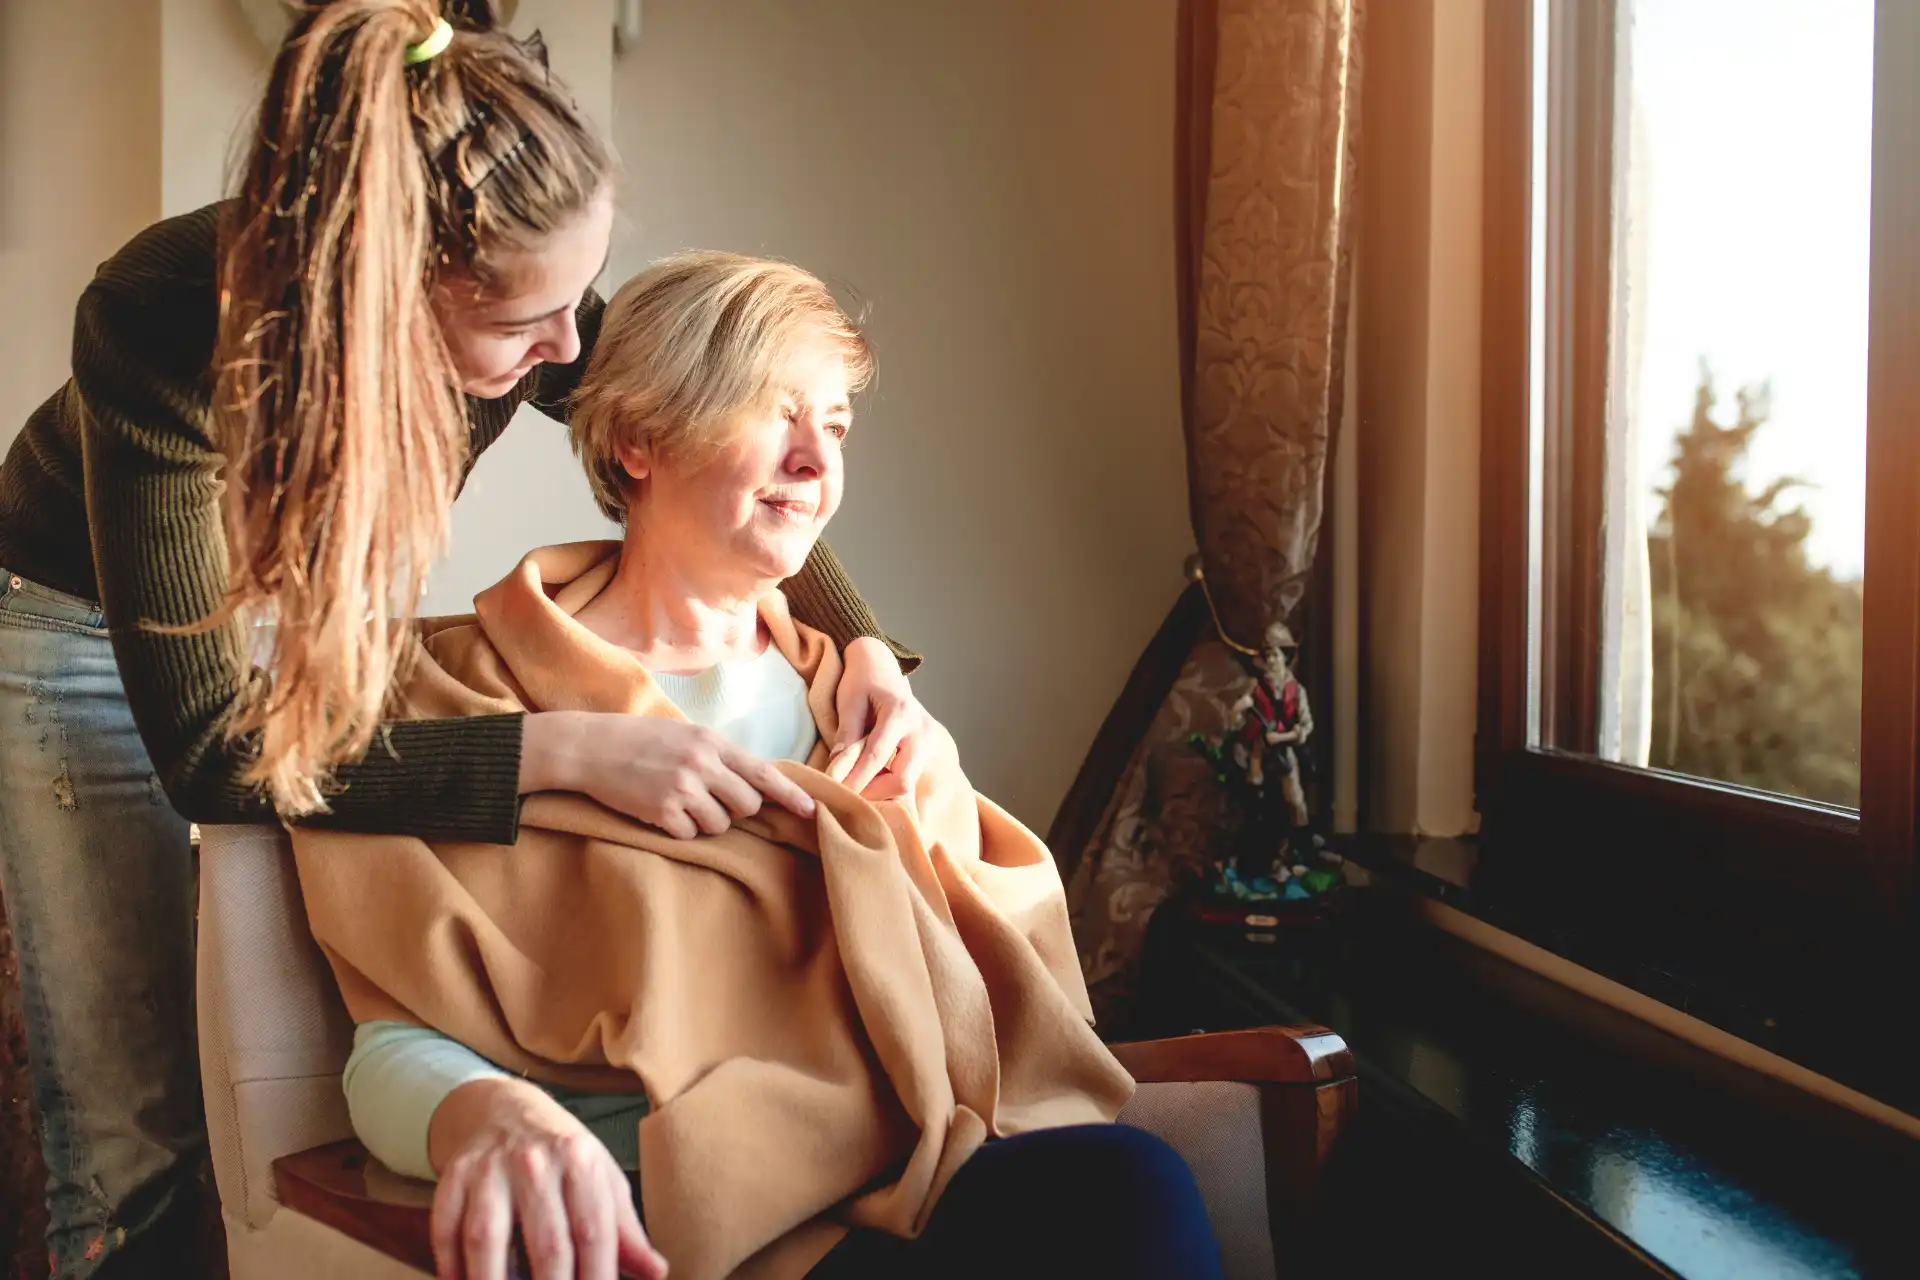 home care services,home care service,personal care service,personal care services near me,in-home caregiving services,homemakers,in-home care giving